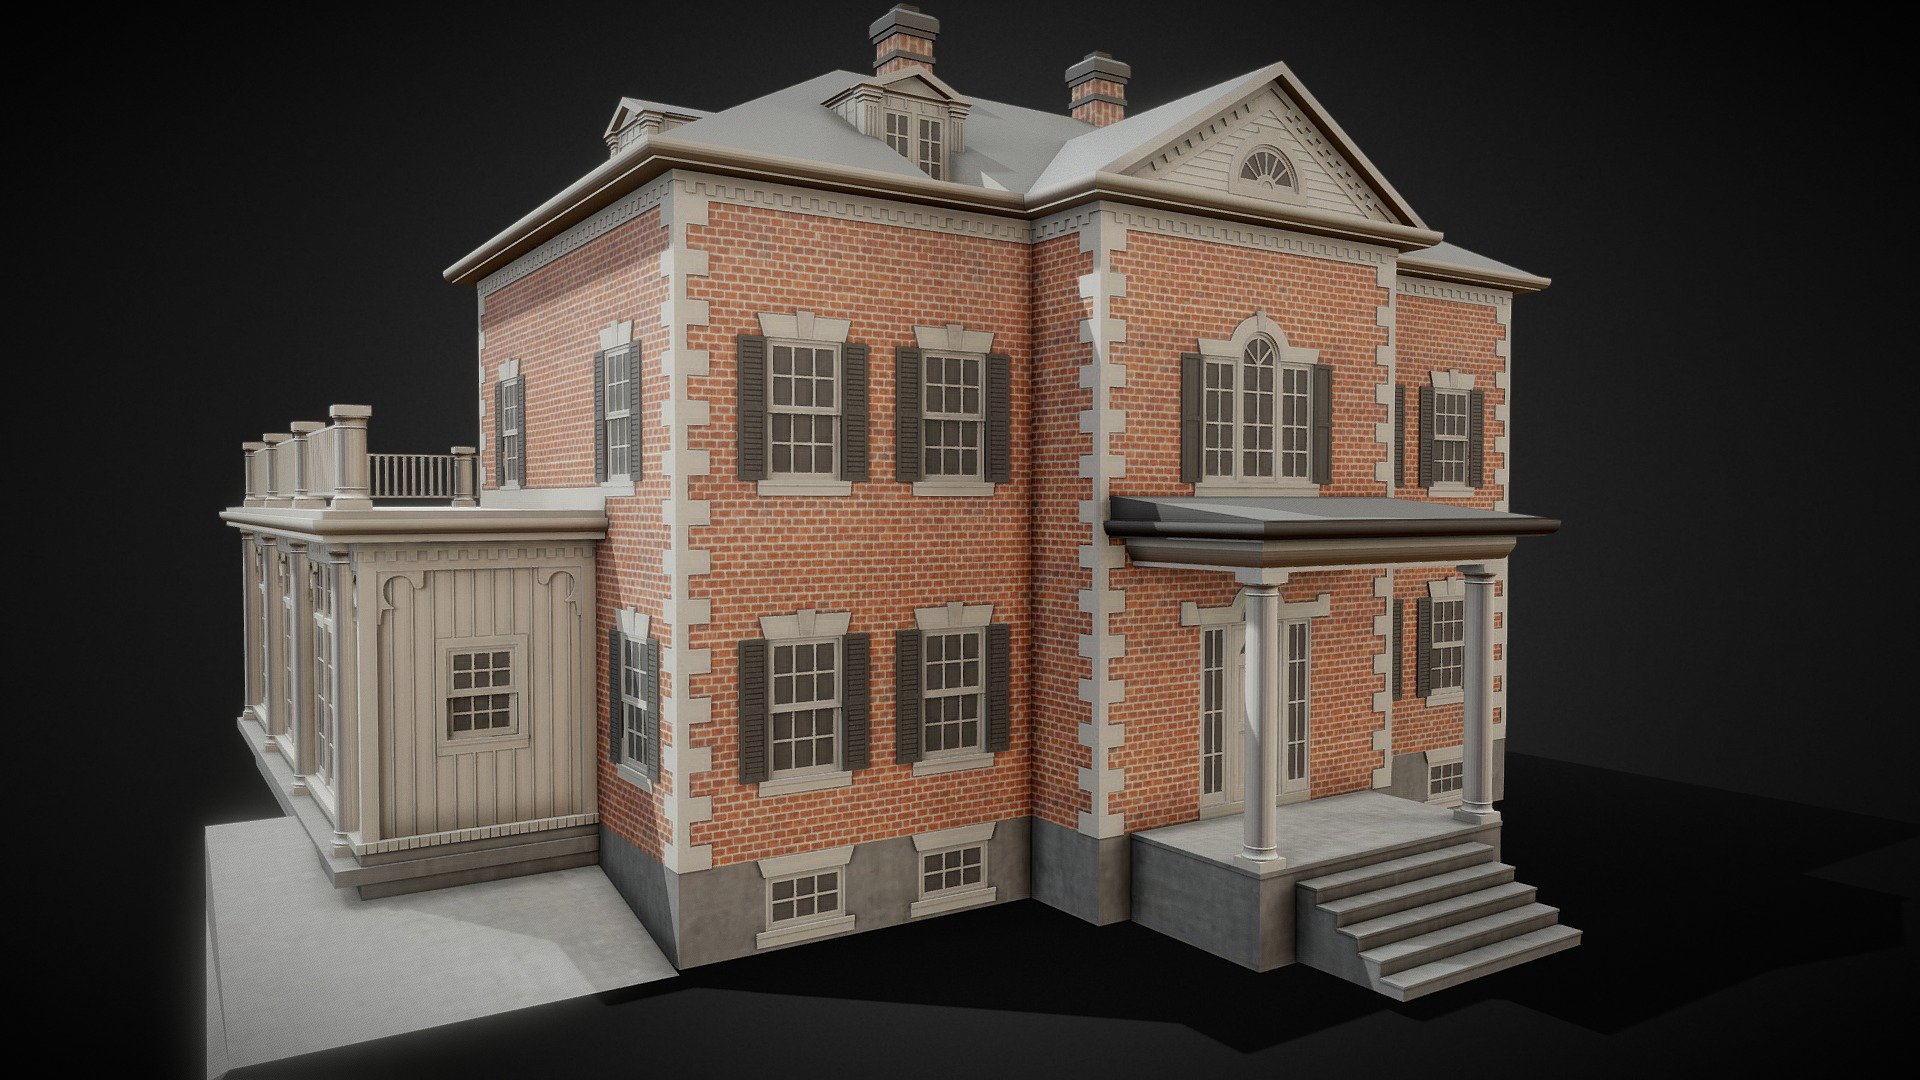 Here is the game ready asset 3d model of a Colonial Style House. This is a fully baked Model ready to use in your upcoming projects.

All Textures are included with the Model.

Model is low poly perfectly ideal for games.

If you have any custom requirements for this model Like, Specific color themes or different roof styles we can surely generate those.
Please write to us at infogofor3d@gmail.com

Also if you have custom architectural model requirement please write to us, We would be happy to assist.

Please follow our channel to get updates of the new upcoming models.

Thanks for visiting our Page 3d model